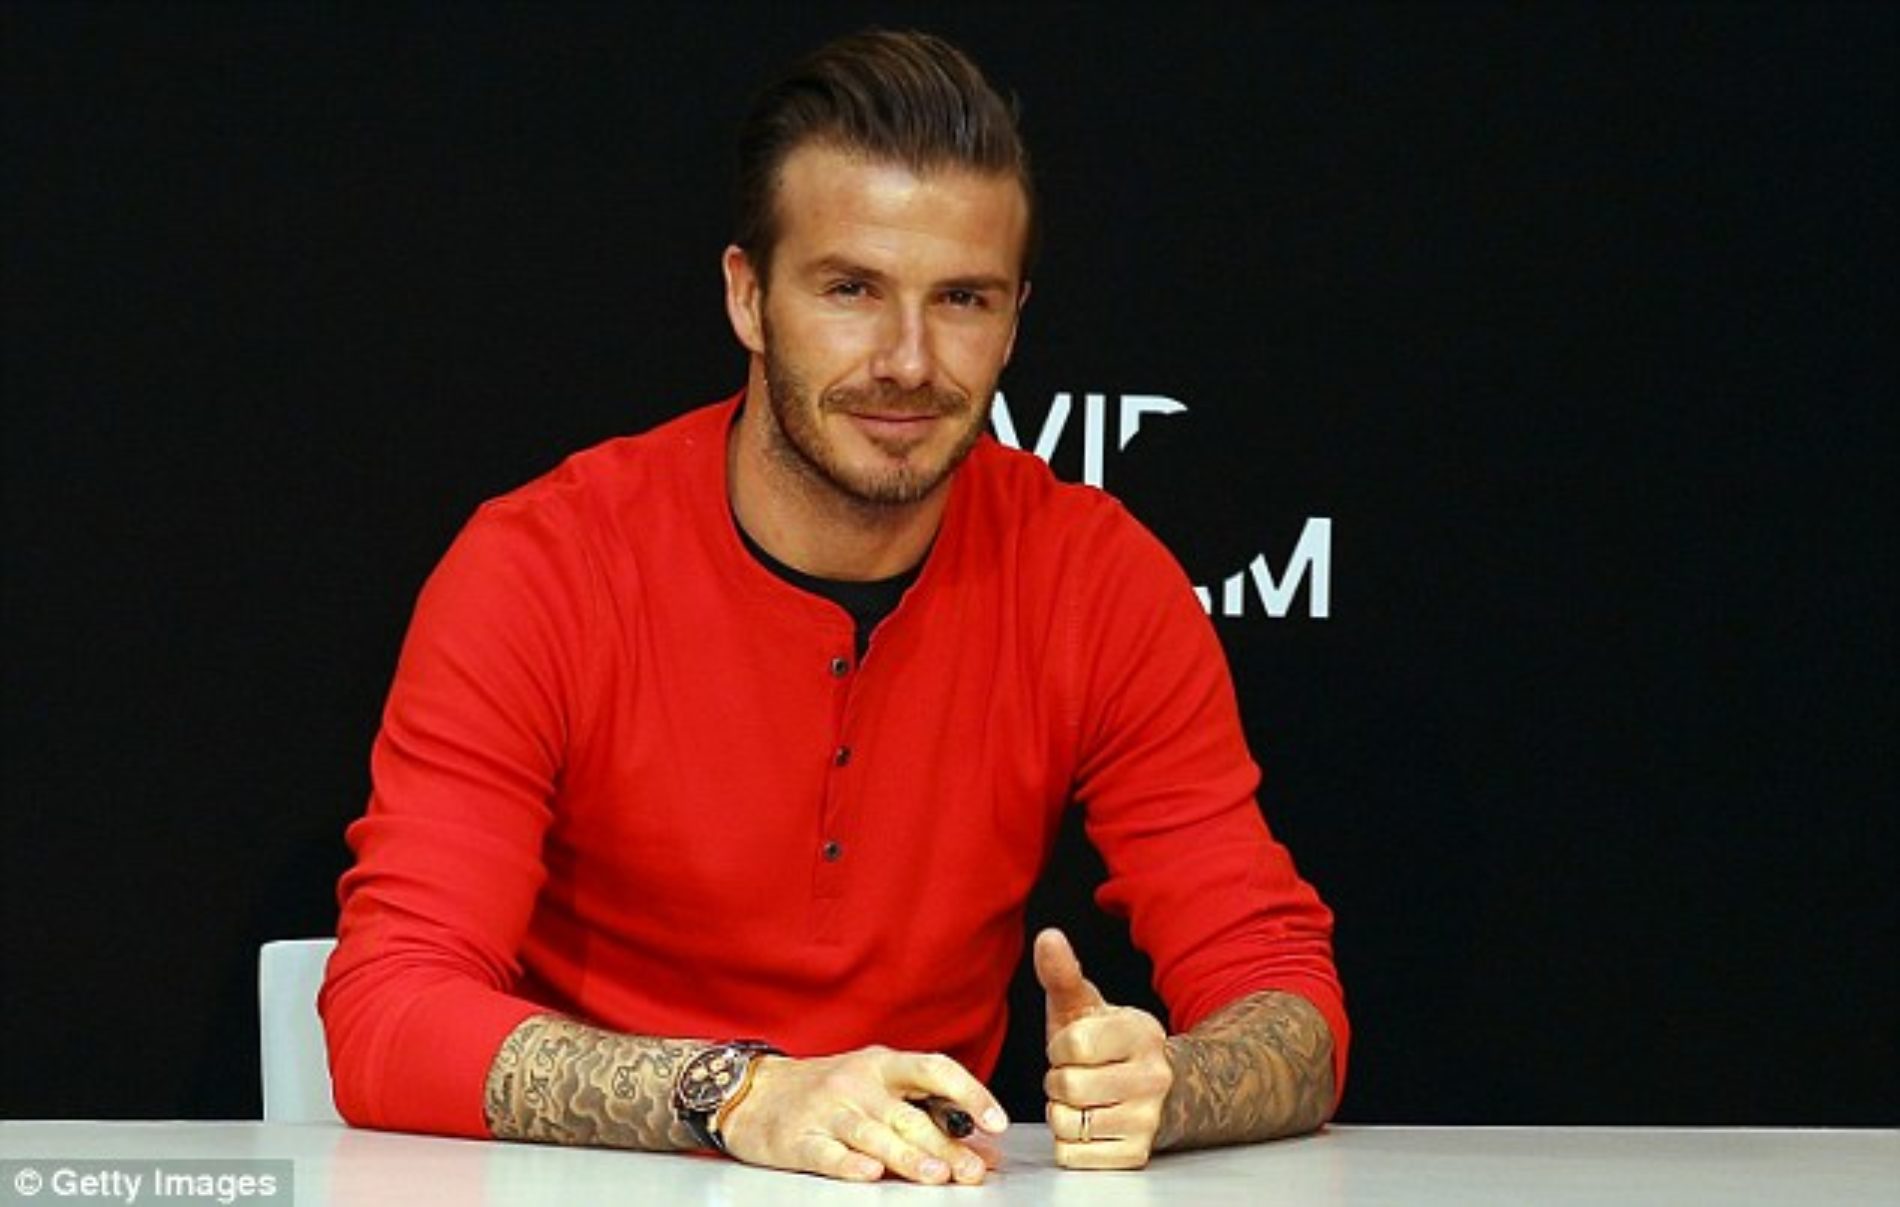 David Beckham Crowned PEOPLE’s Sexiest Man Alive of 2015